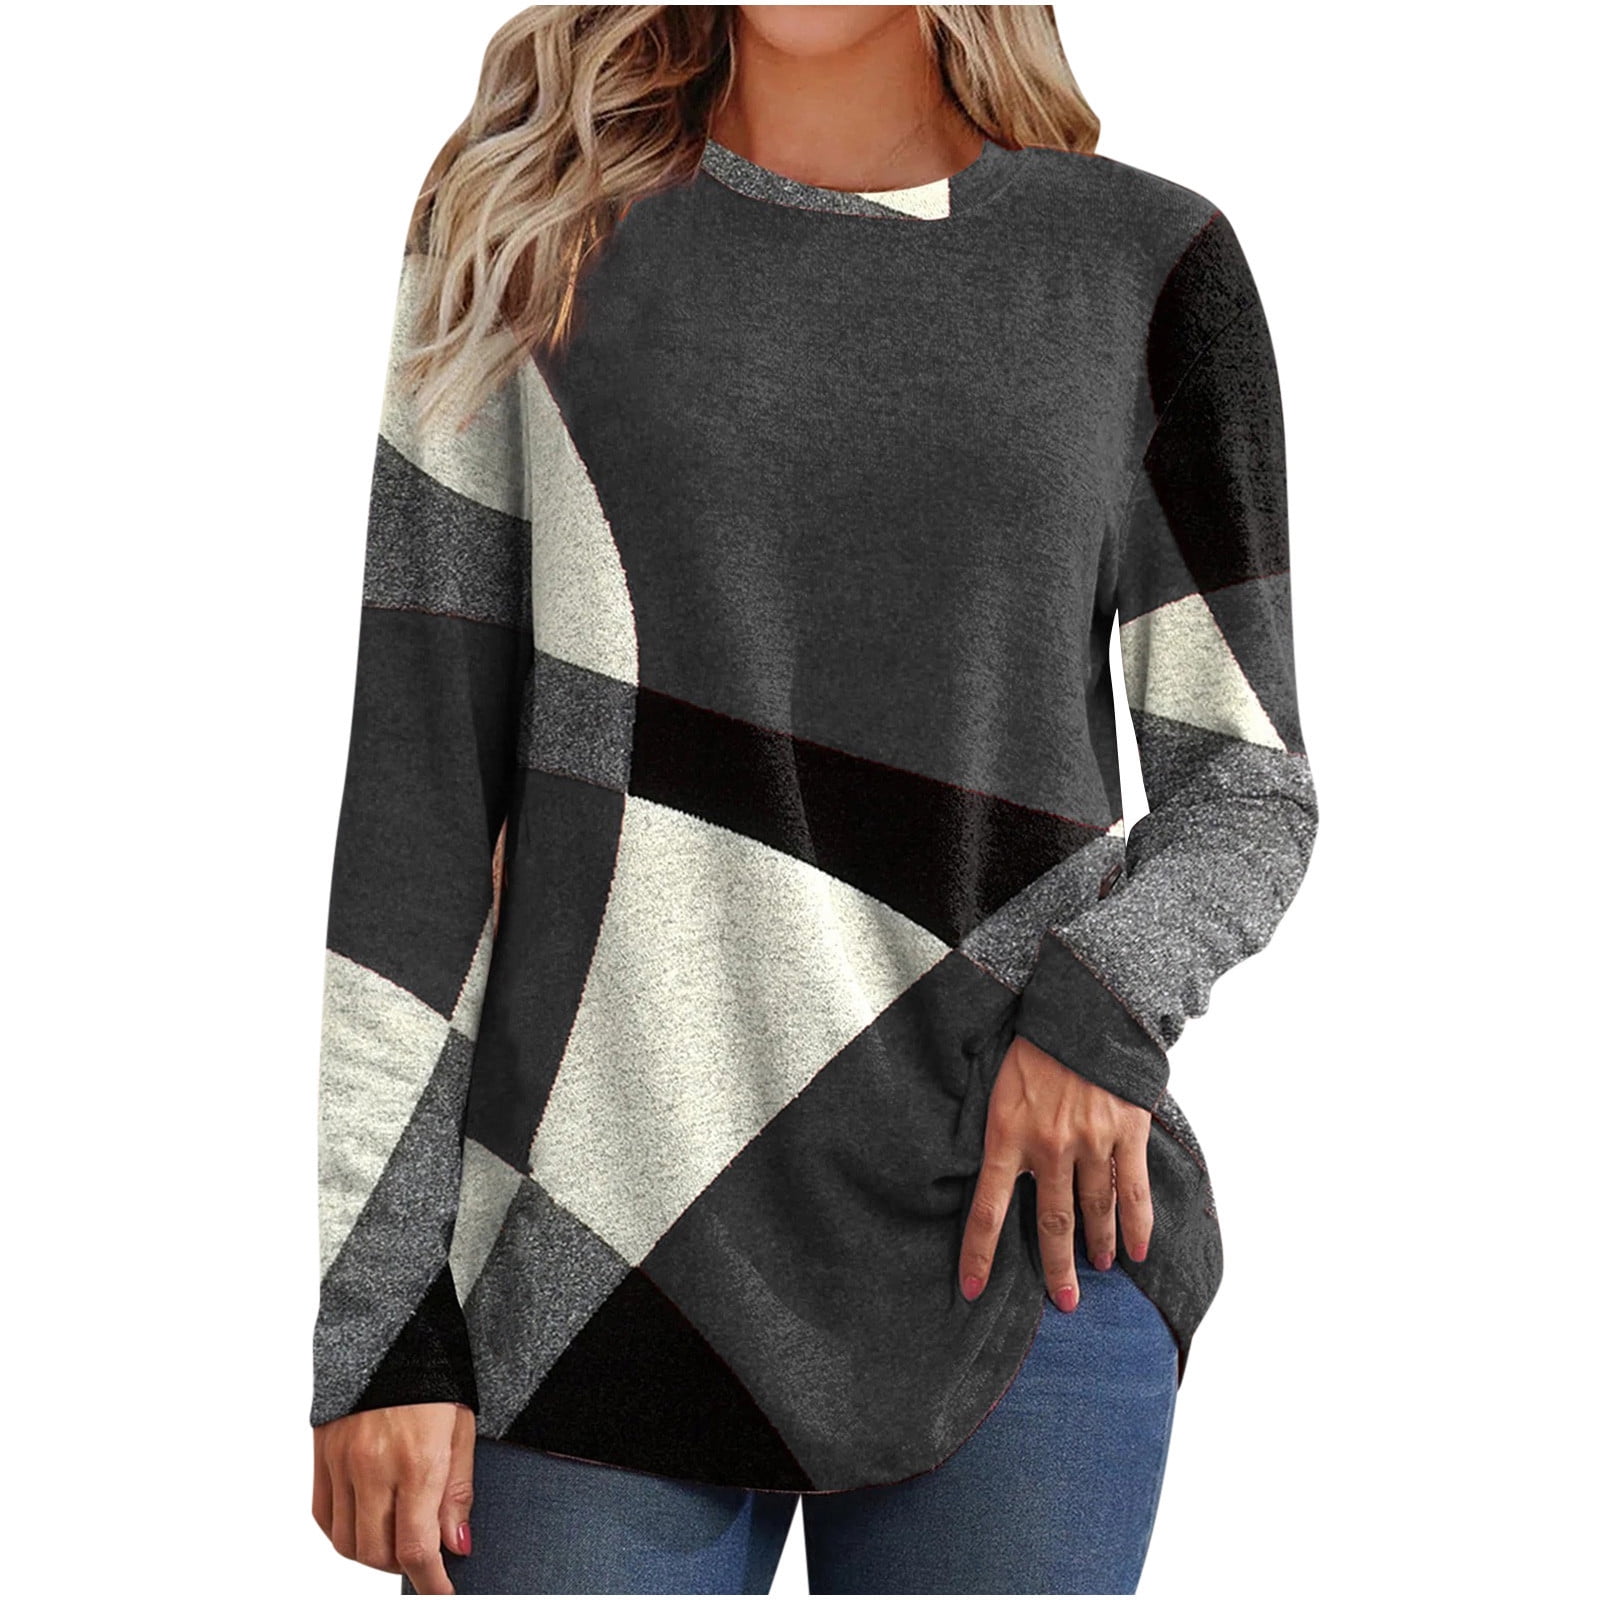 Graphic Hoodies Winter Loose Top,1 Dollar Items Only,Christian Bulk  Gifts,Womens Clearance Dresses,Daily Deals Of The Day Prime Today Only  Halloween,Bulk T-Shirts,Gifts Under 20 Dollars for Women at  Women's  Clothing store